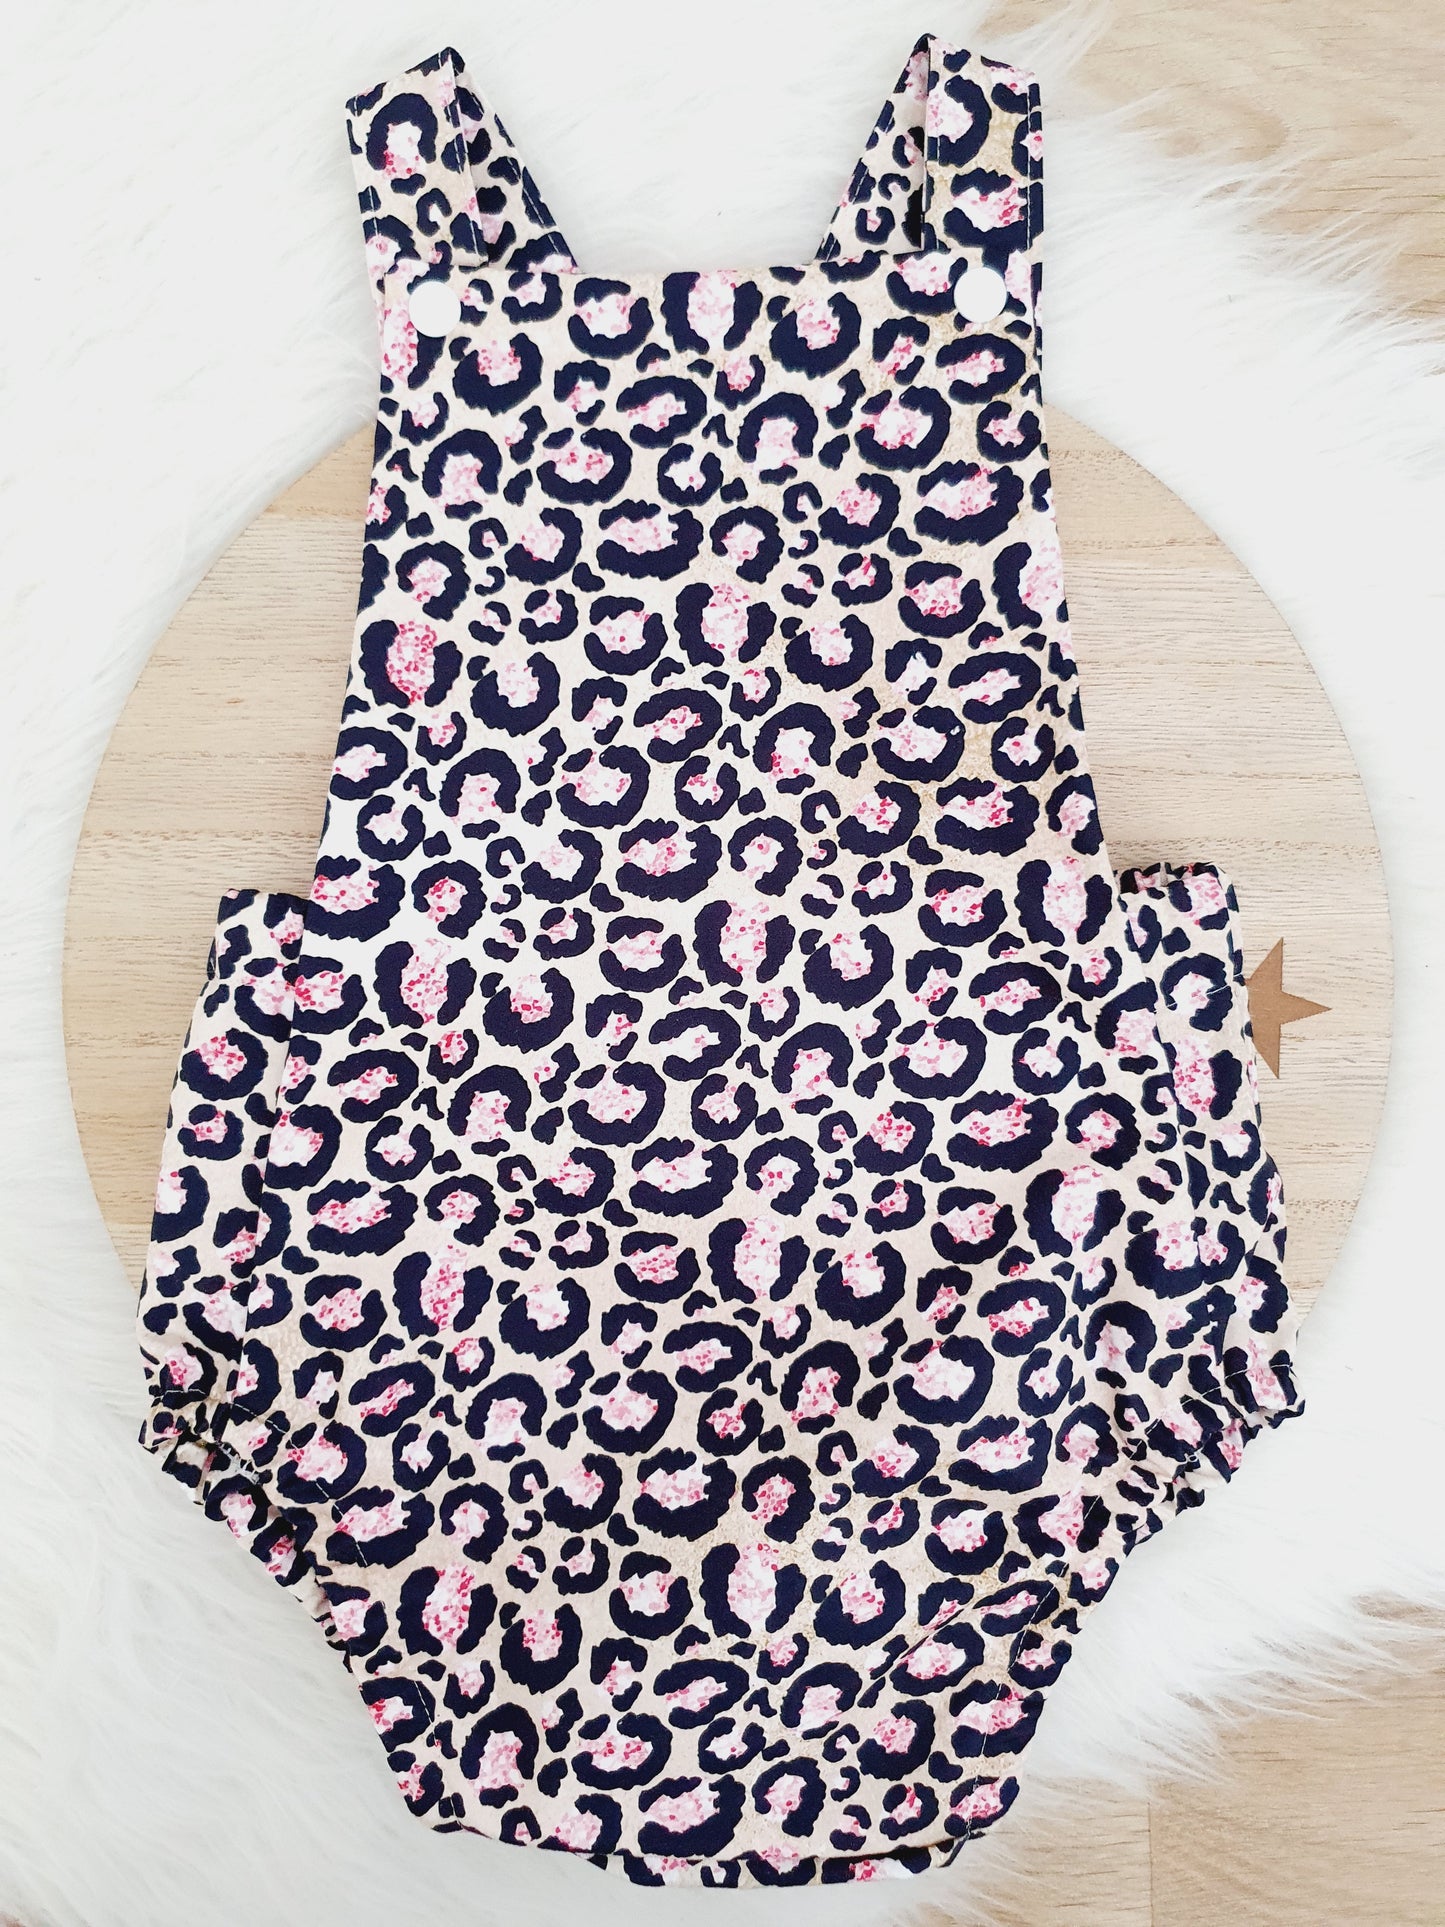 ANIMAL PRINT Handmade Romper Baby / Toddler / Child Clothing / Birthday Outfit, Size 2